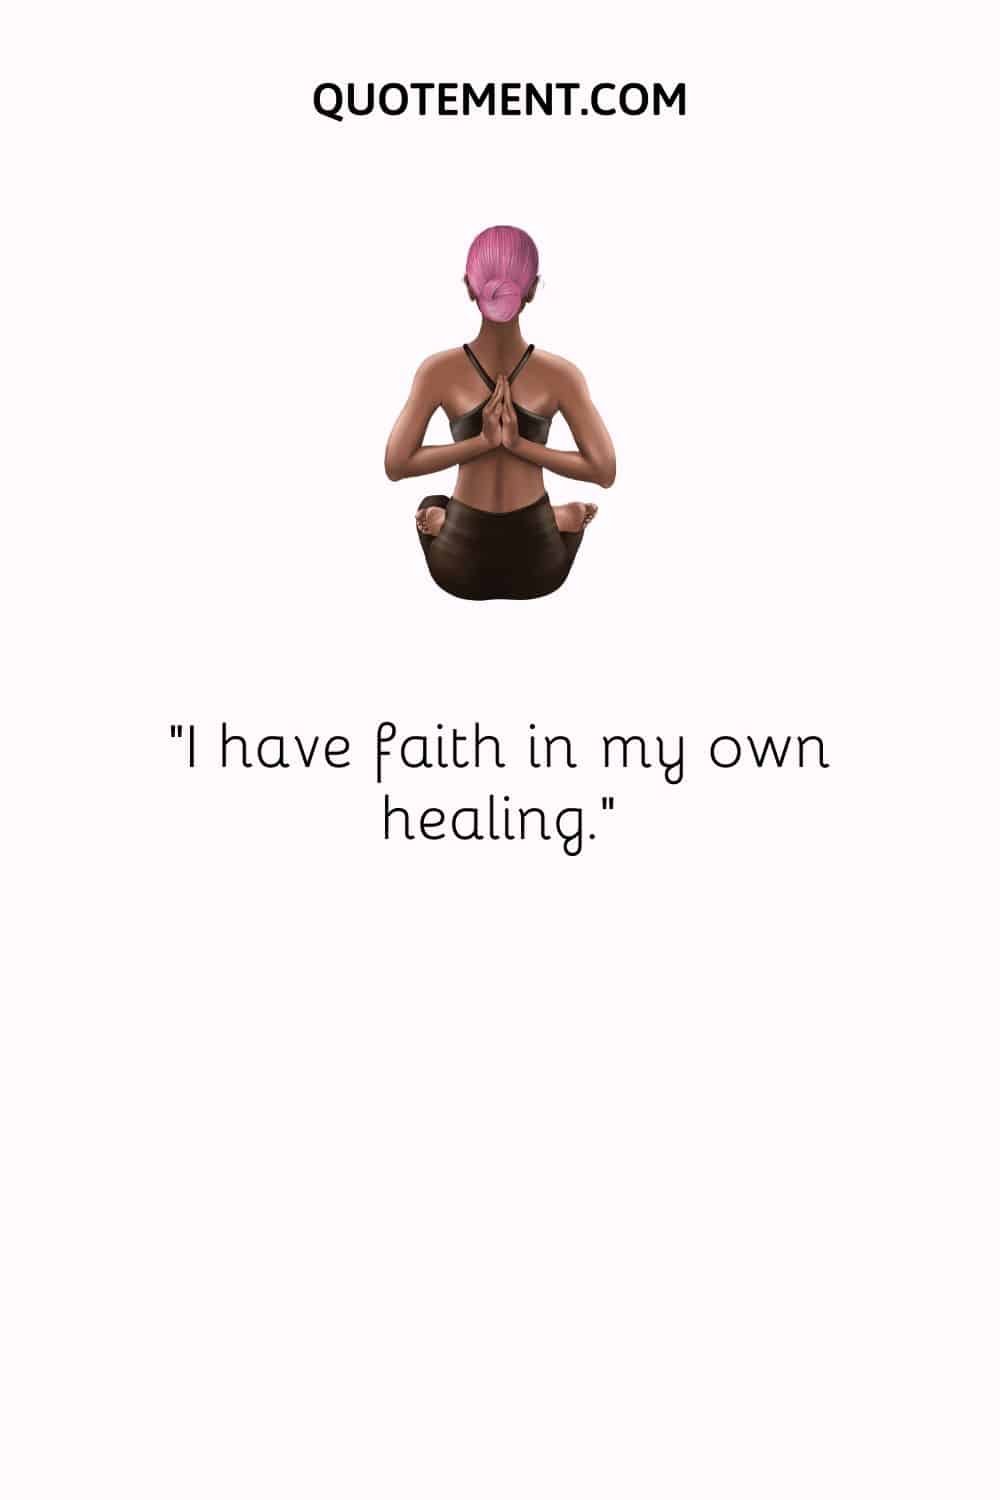 I have faith in my own healing